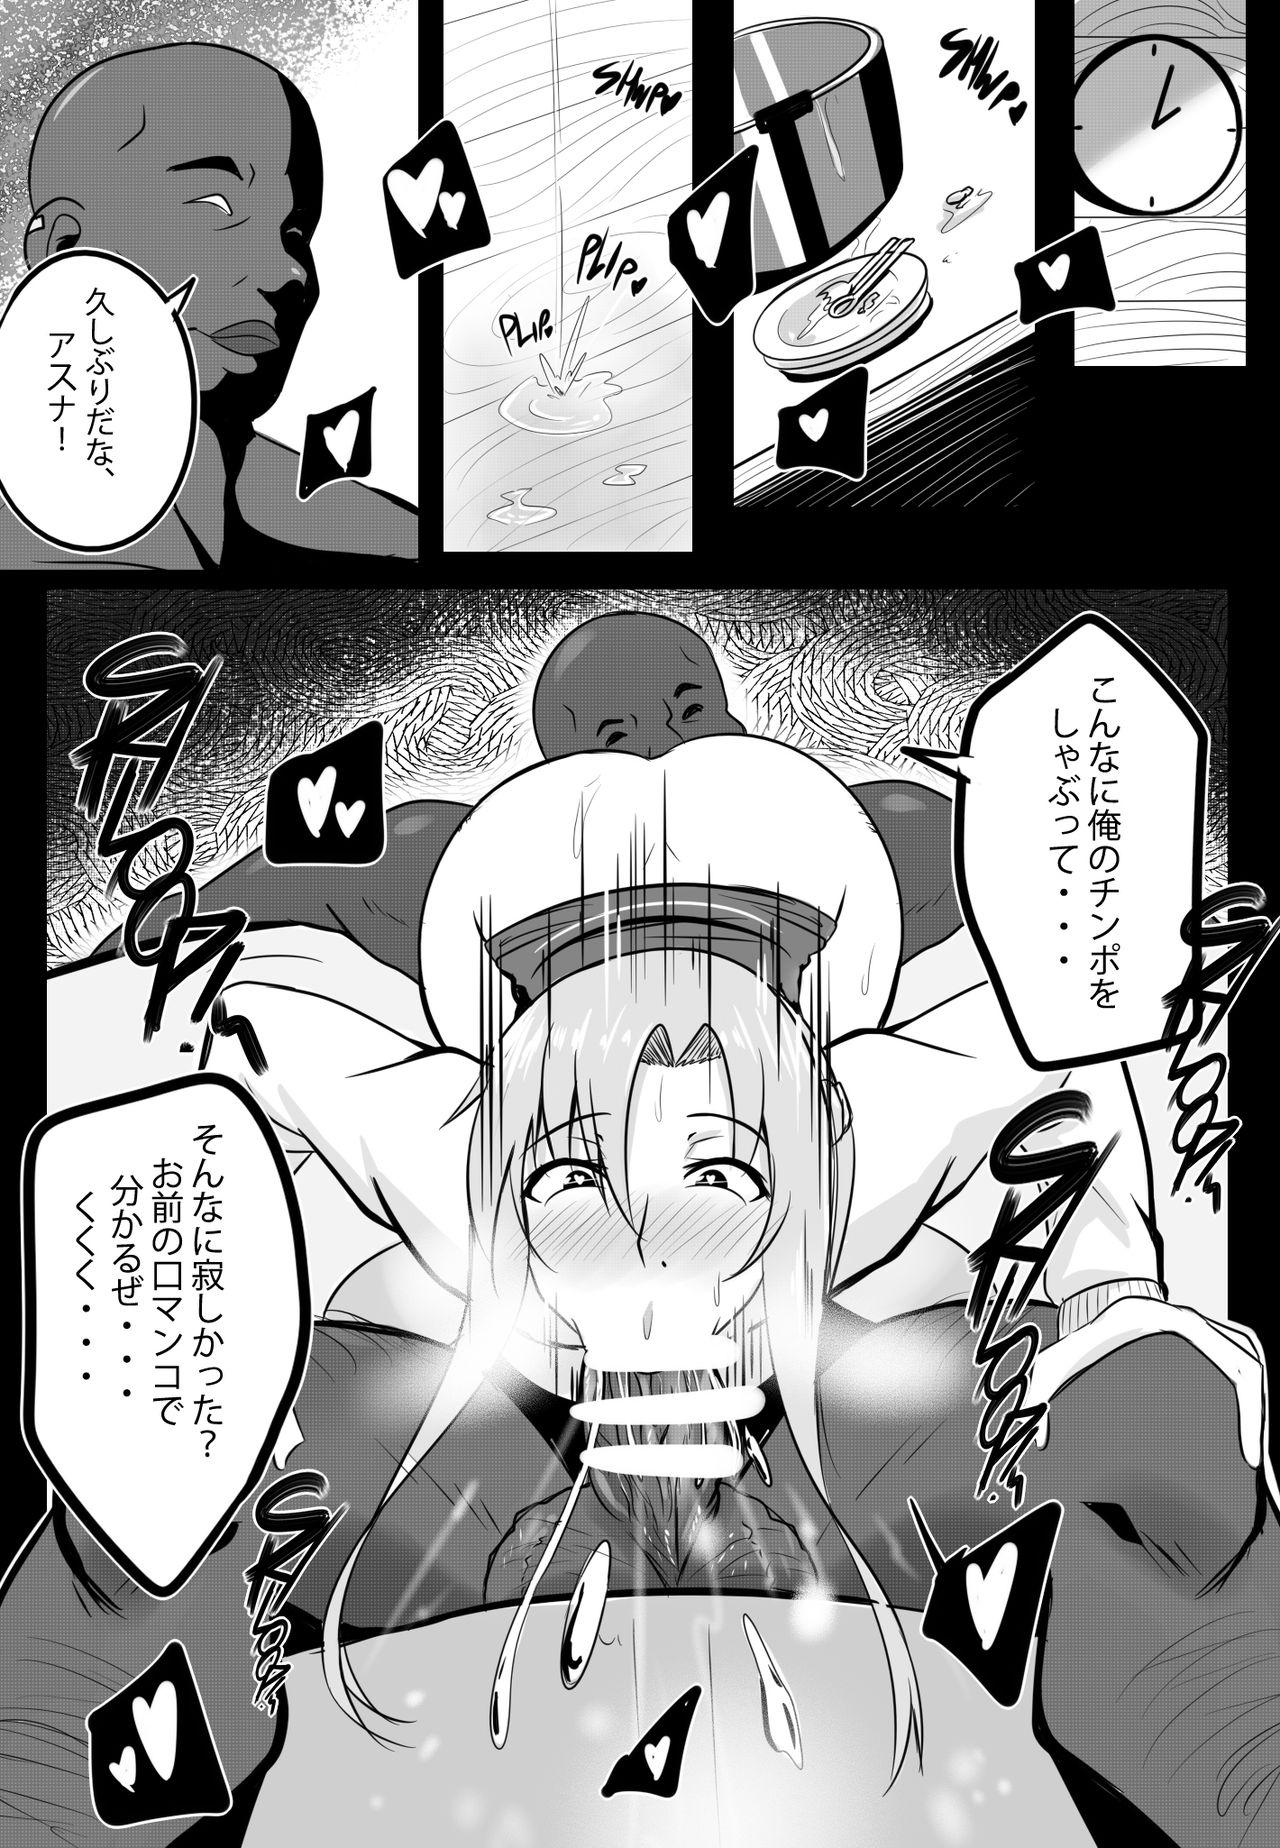 Trimmed B-Trayal 19 - Sword art online Pussy Fingering - Page 5